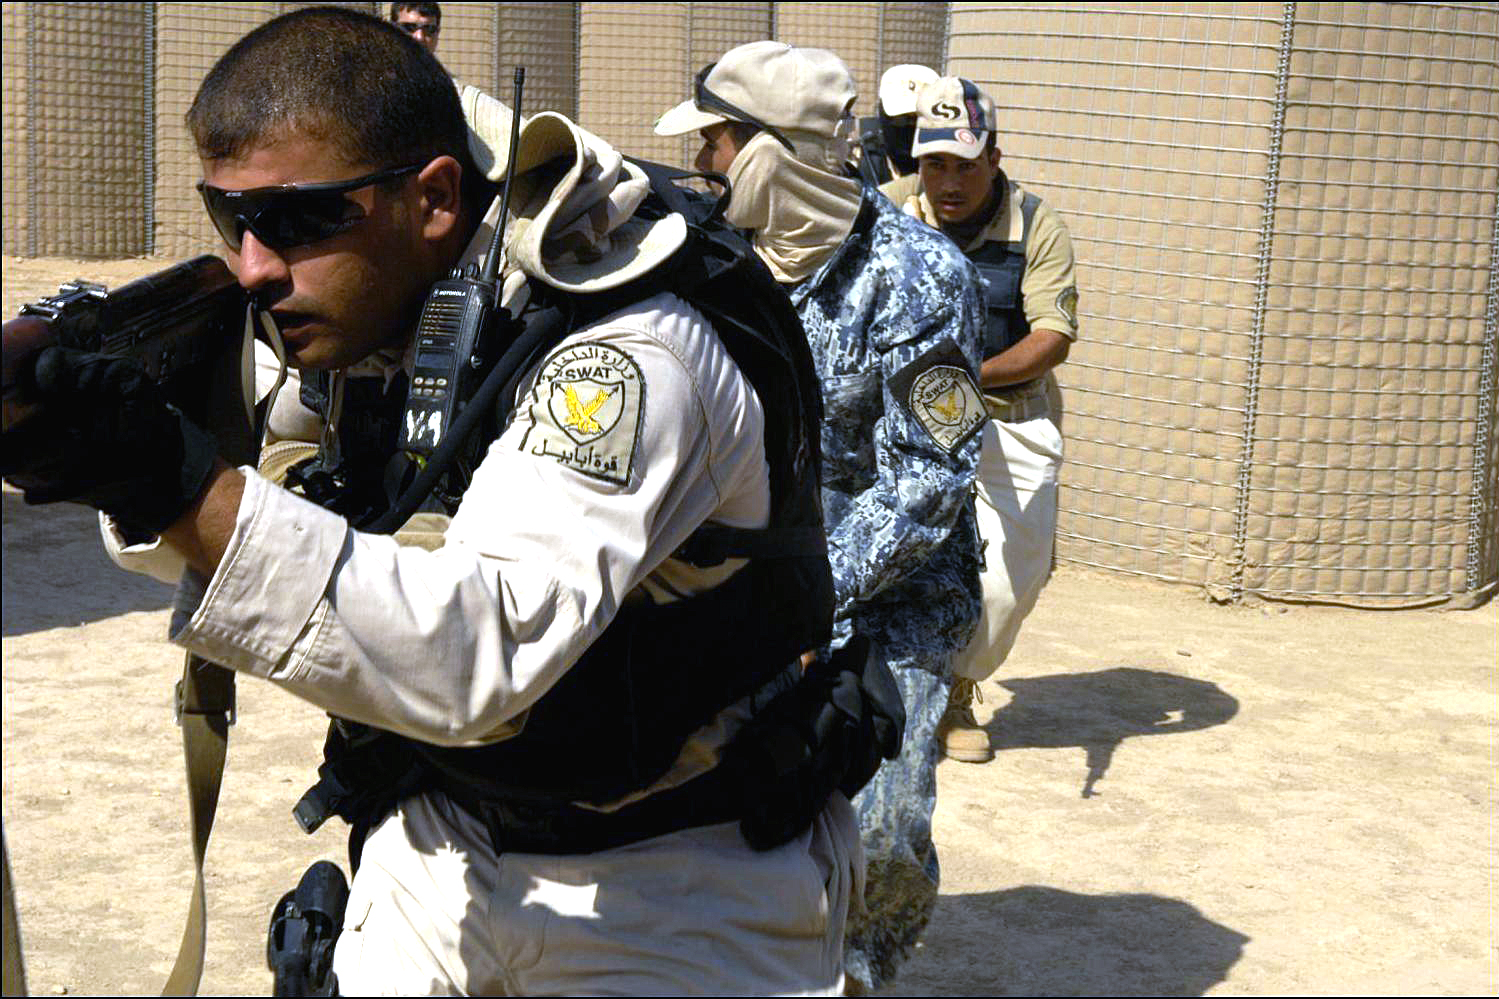 Iraqi Special Weapons and Tactics, or SWAT, police officers move through a  shoot-house training facility